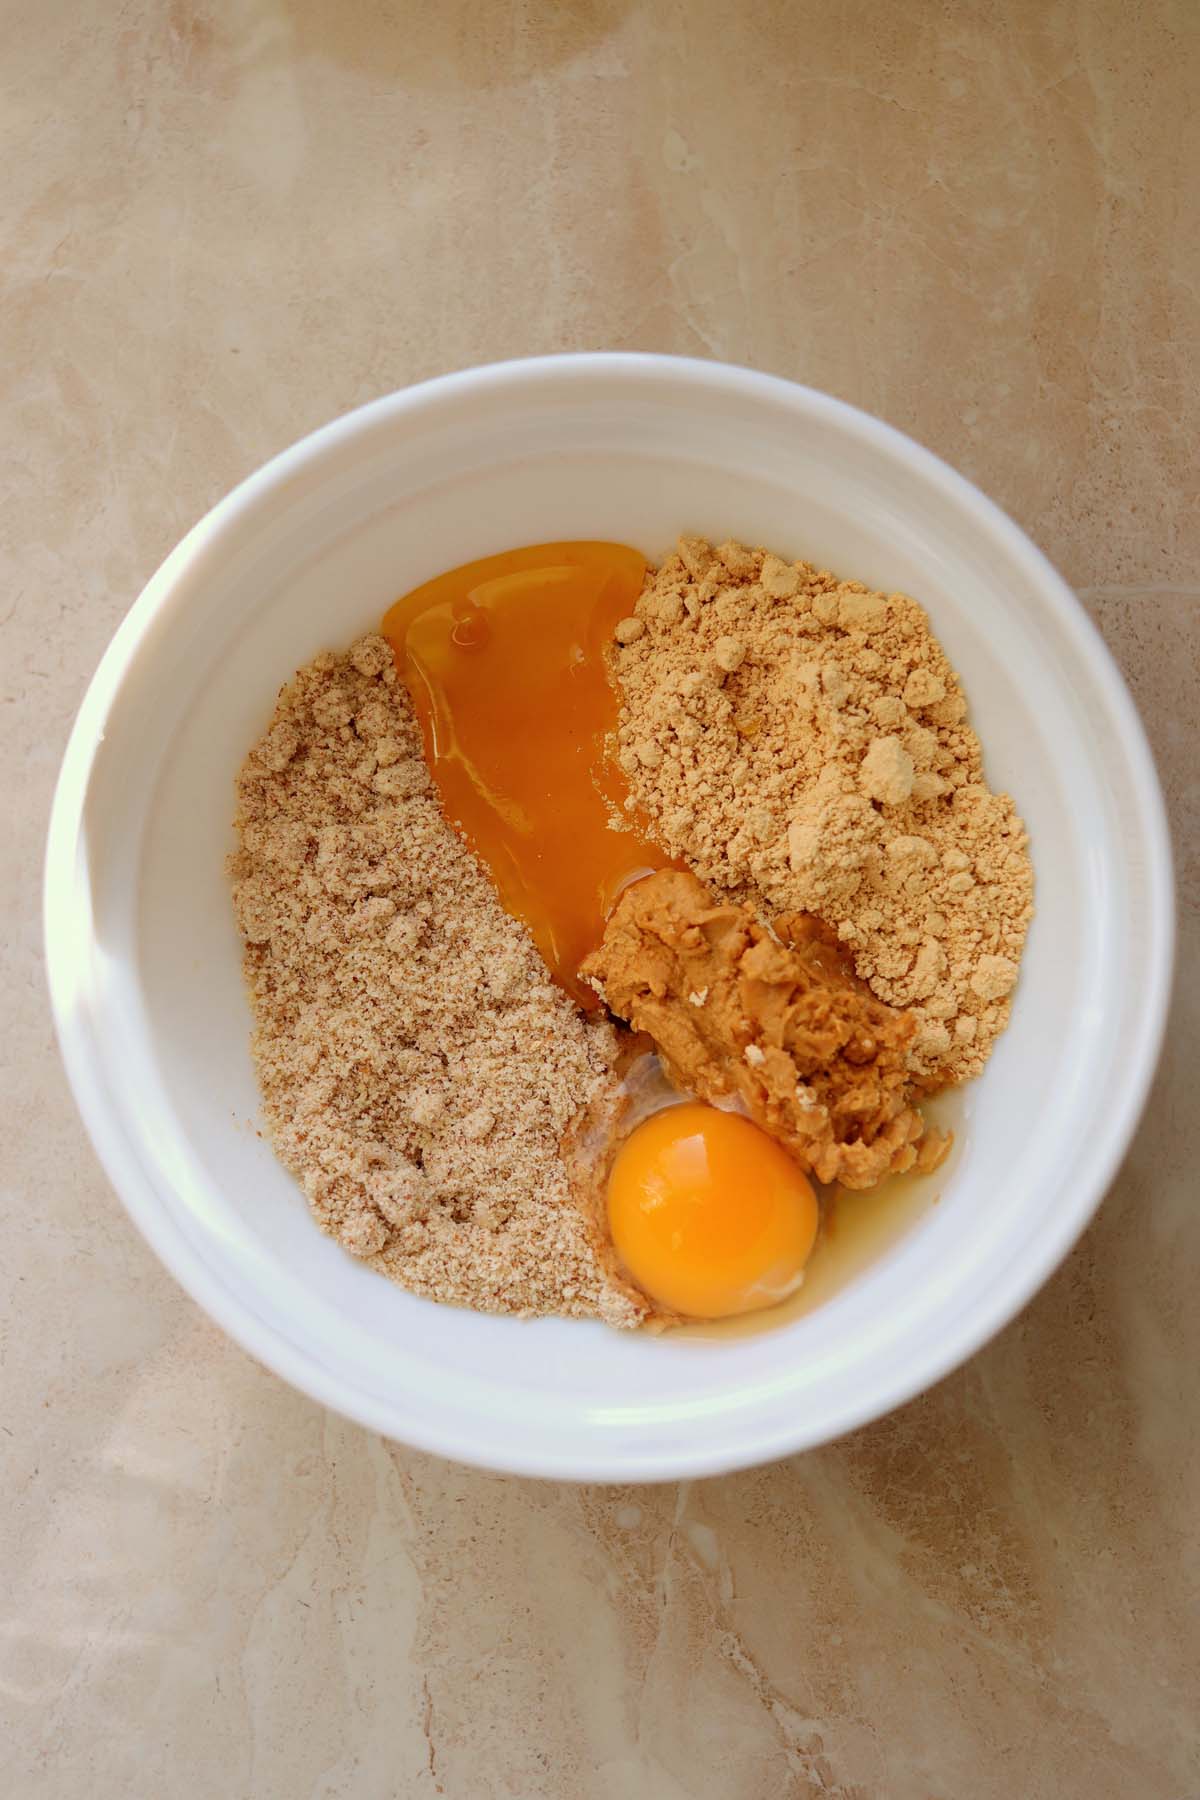 Egg and honey added to the peanut butter powder.